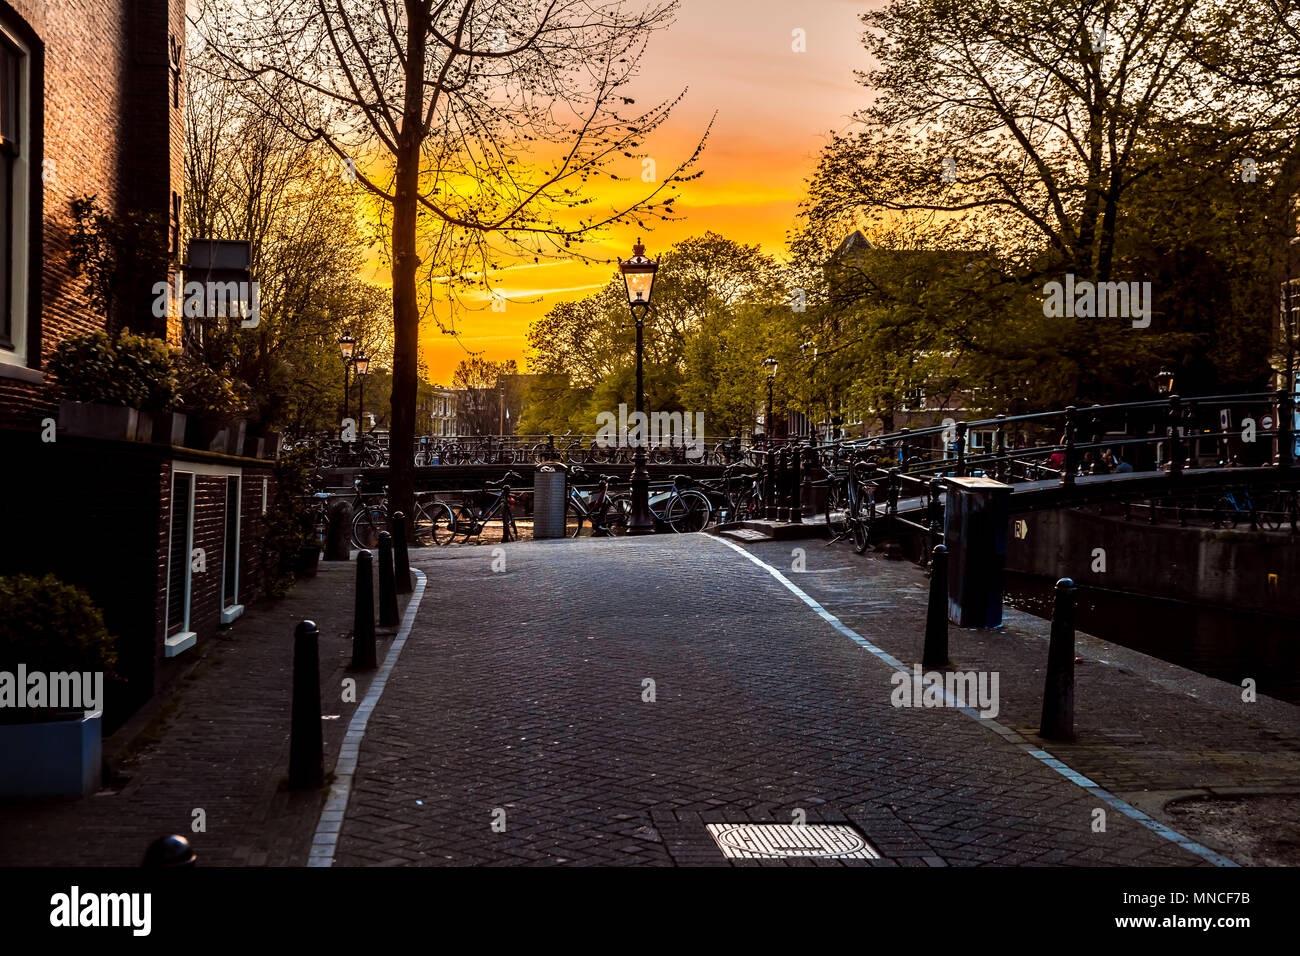 Sunset street view with bridge, bicycles in Amsterdam city, Netherlands Stock Photo